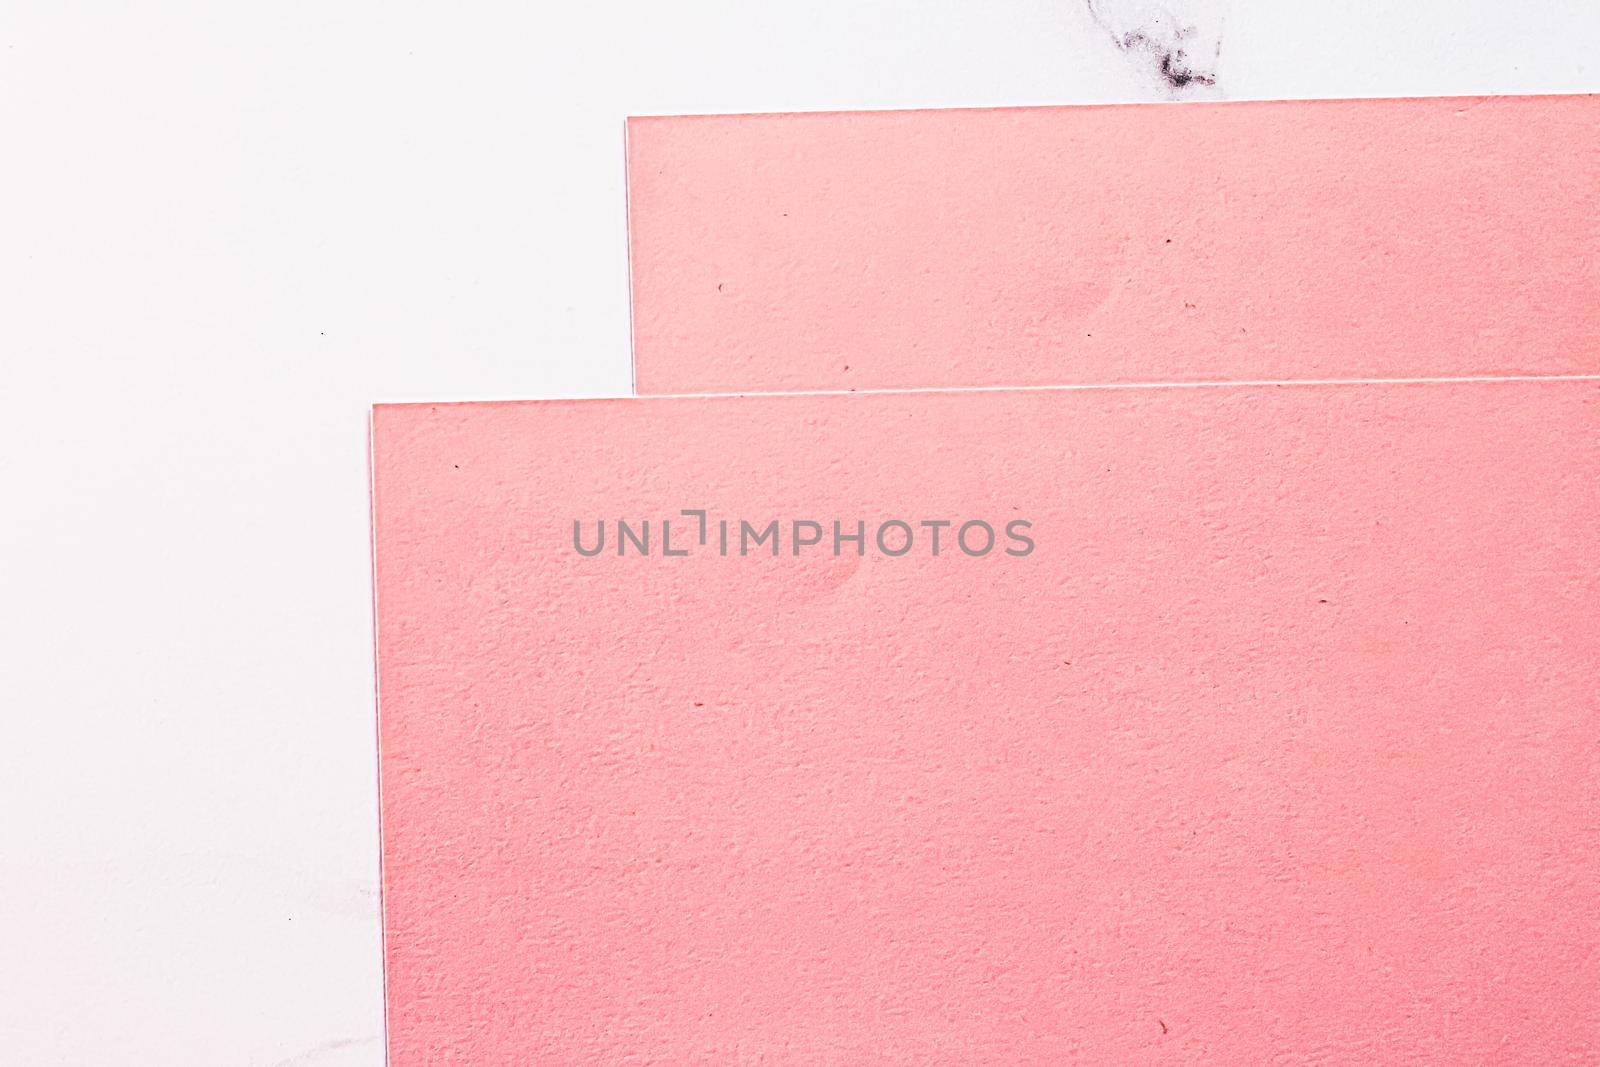 Pink A4 papers on white marble background as office stationery flatlay, luxury branding flat lay and brand identity design for mockups